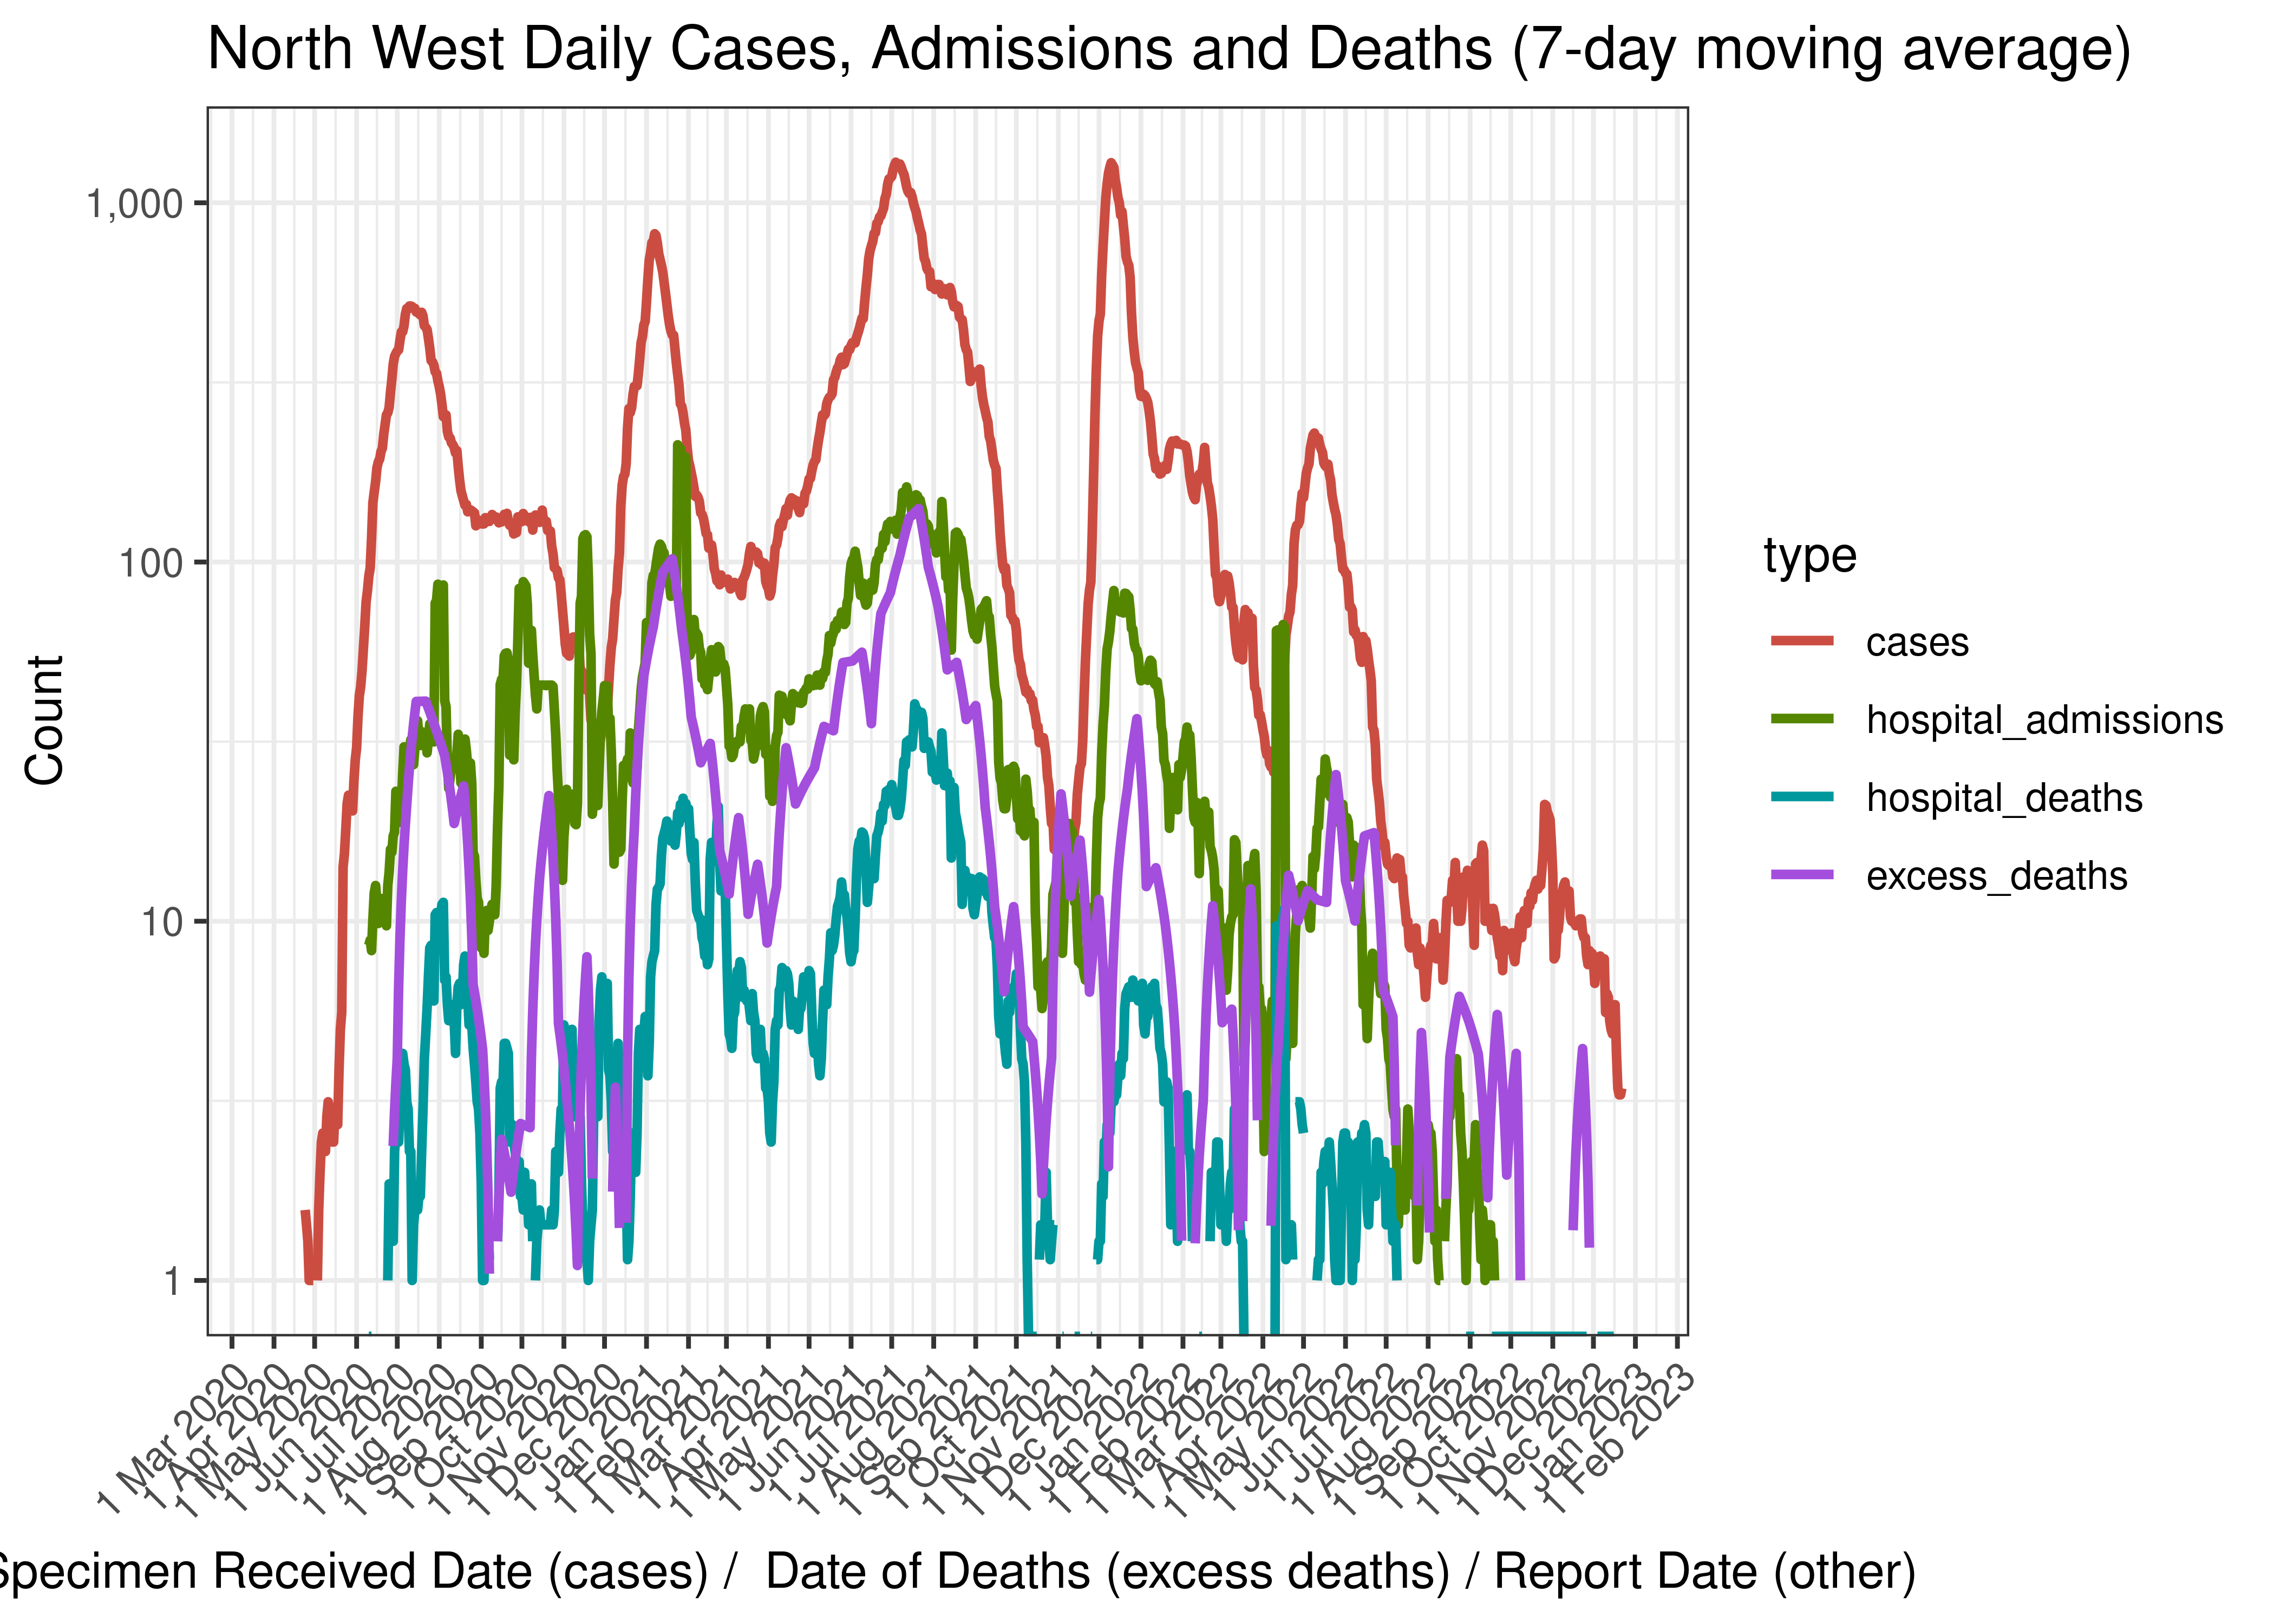 North West Daily Cases, Admissions and Deaths (7-day moving average)